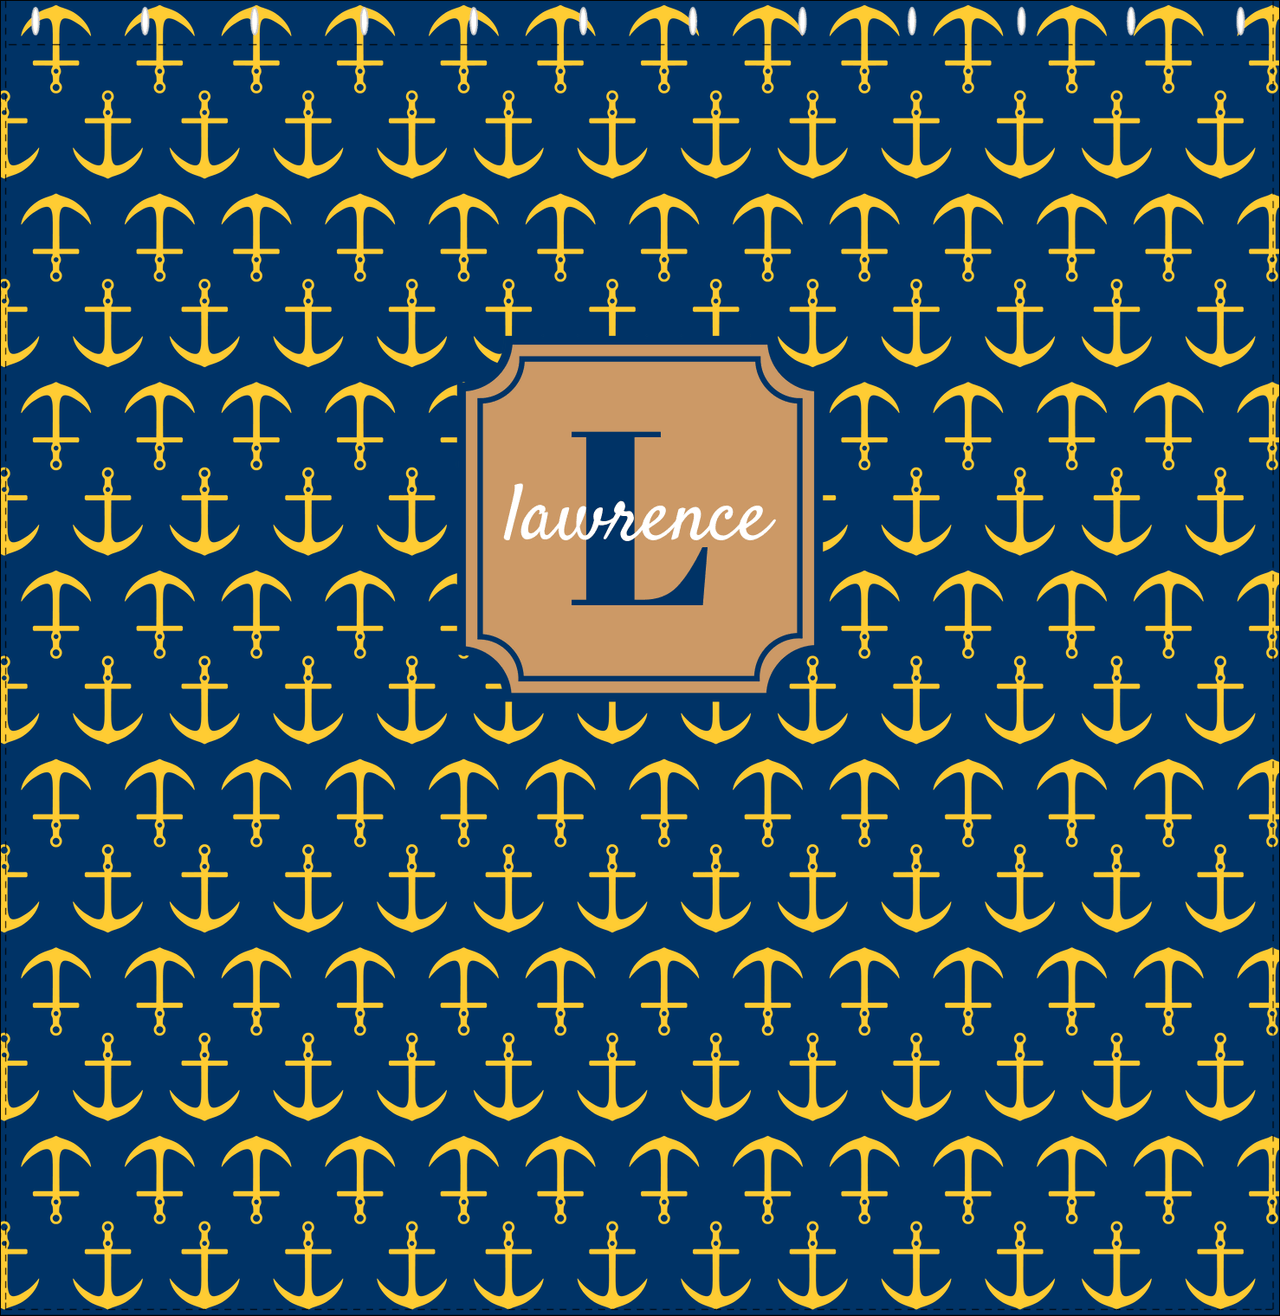 Personalized Anchors Shower Curtain - Navy and Gold - Stamp Nameplate - Decorate View